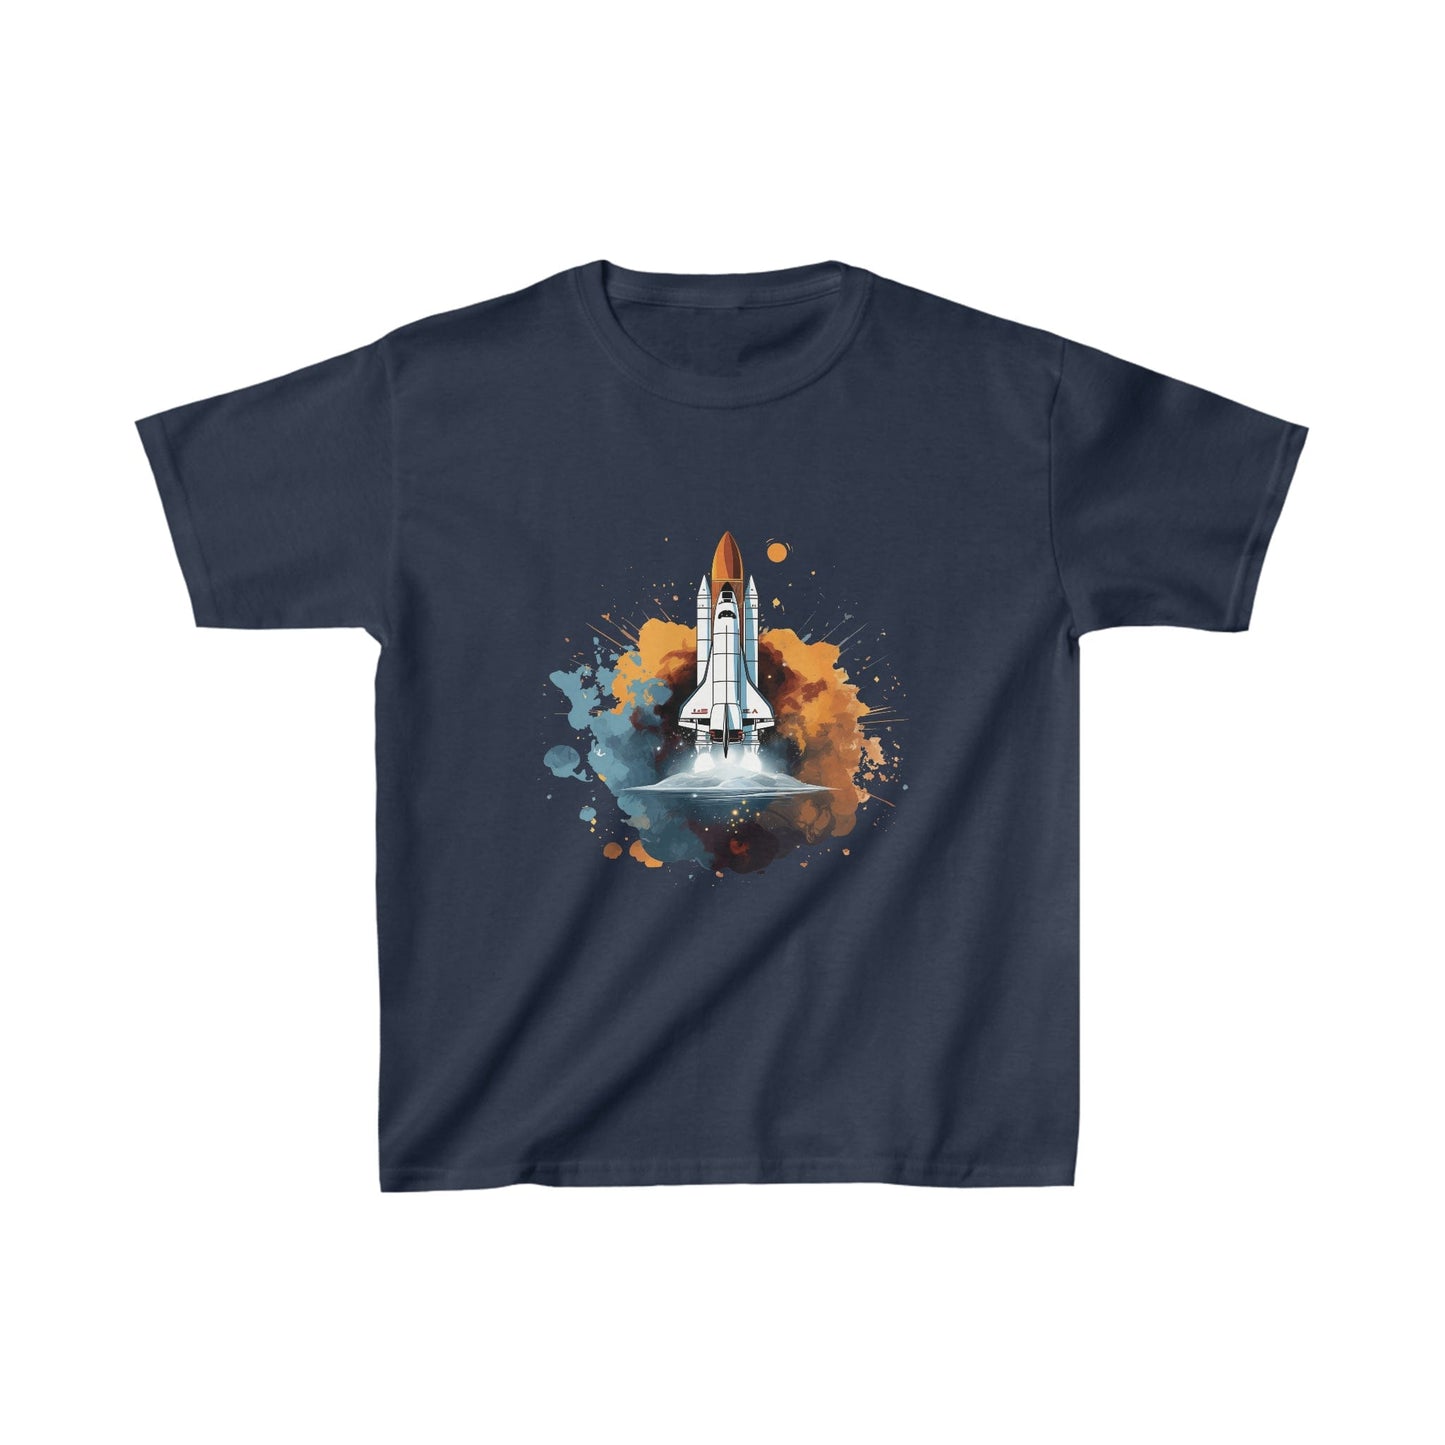 Kids clothes XS / Navy Youth Space Shuttle Splash T-Shirt